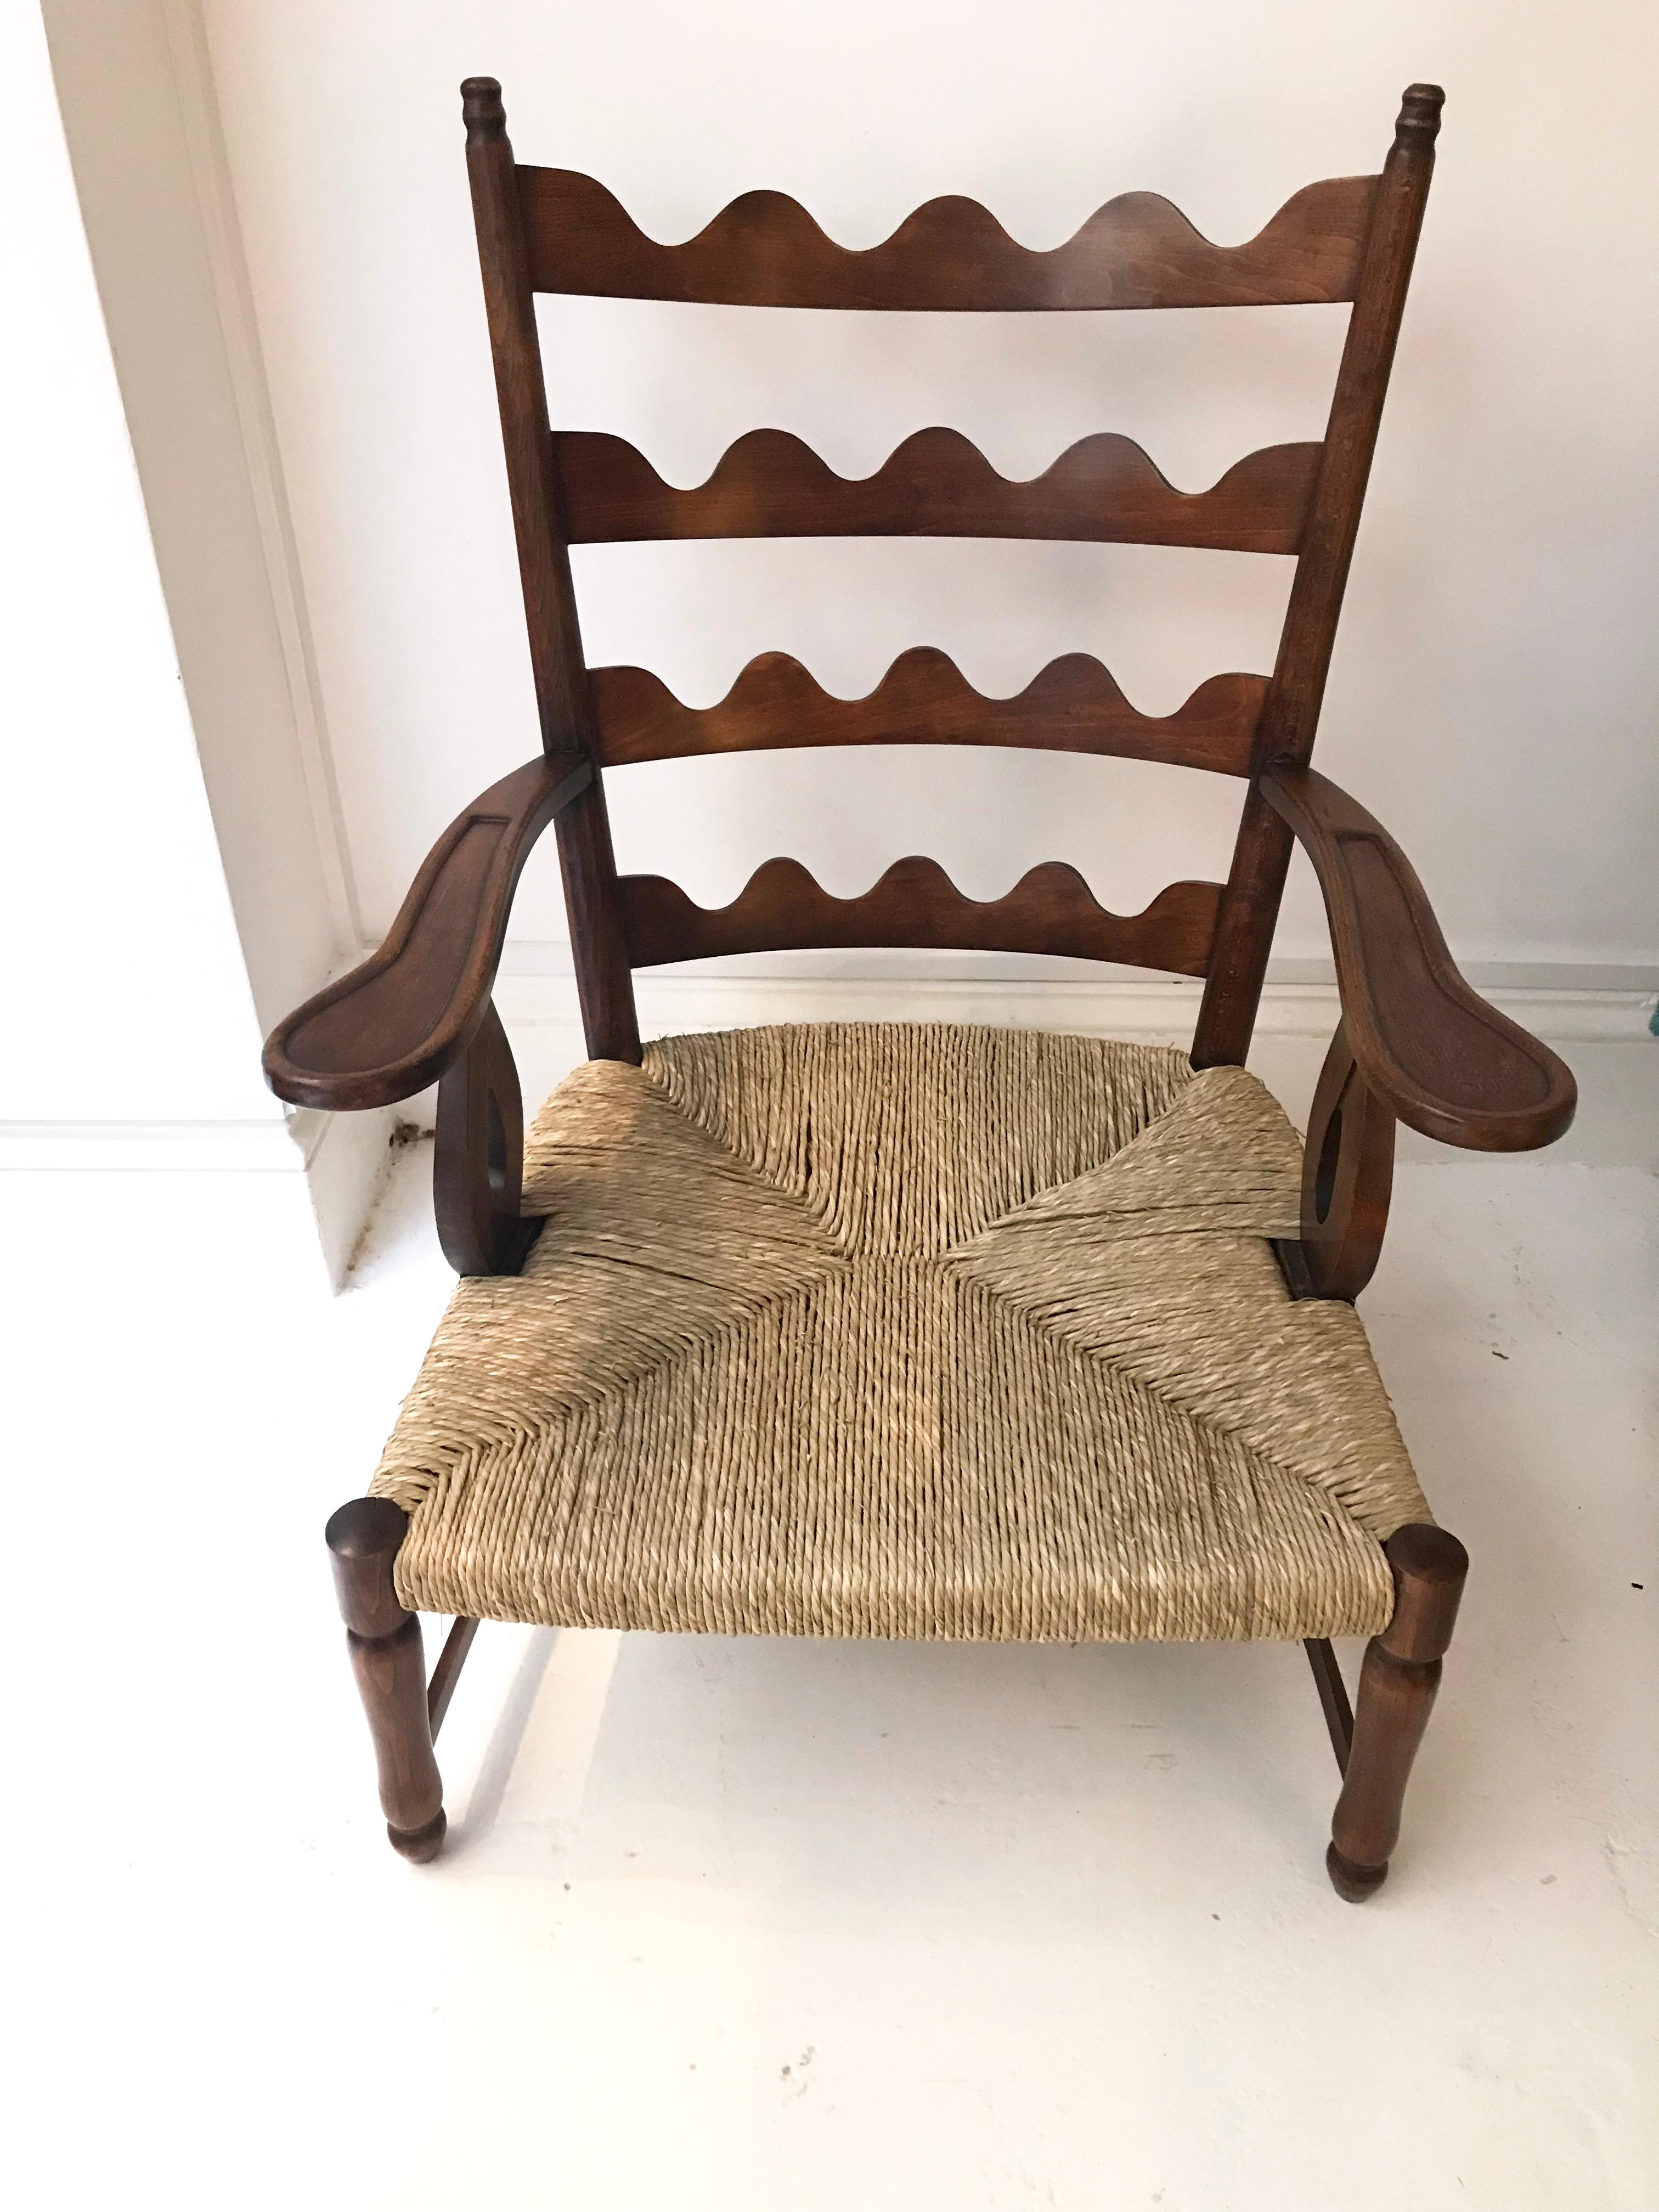 Pair of armchairs by Paolo Buffa, circa 1940. Walnut frame with woven rush seat. Recently restored.
Measures: 95 x 70 x 70 cm.